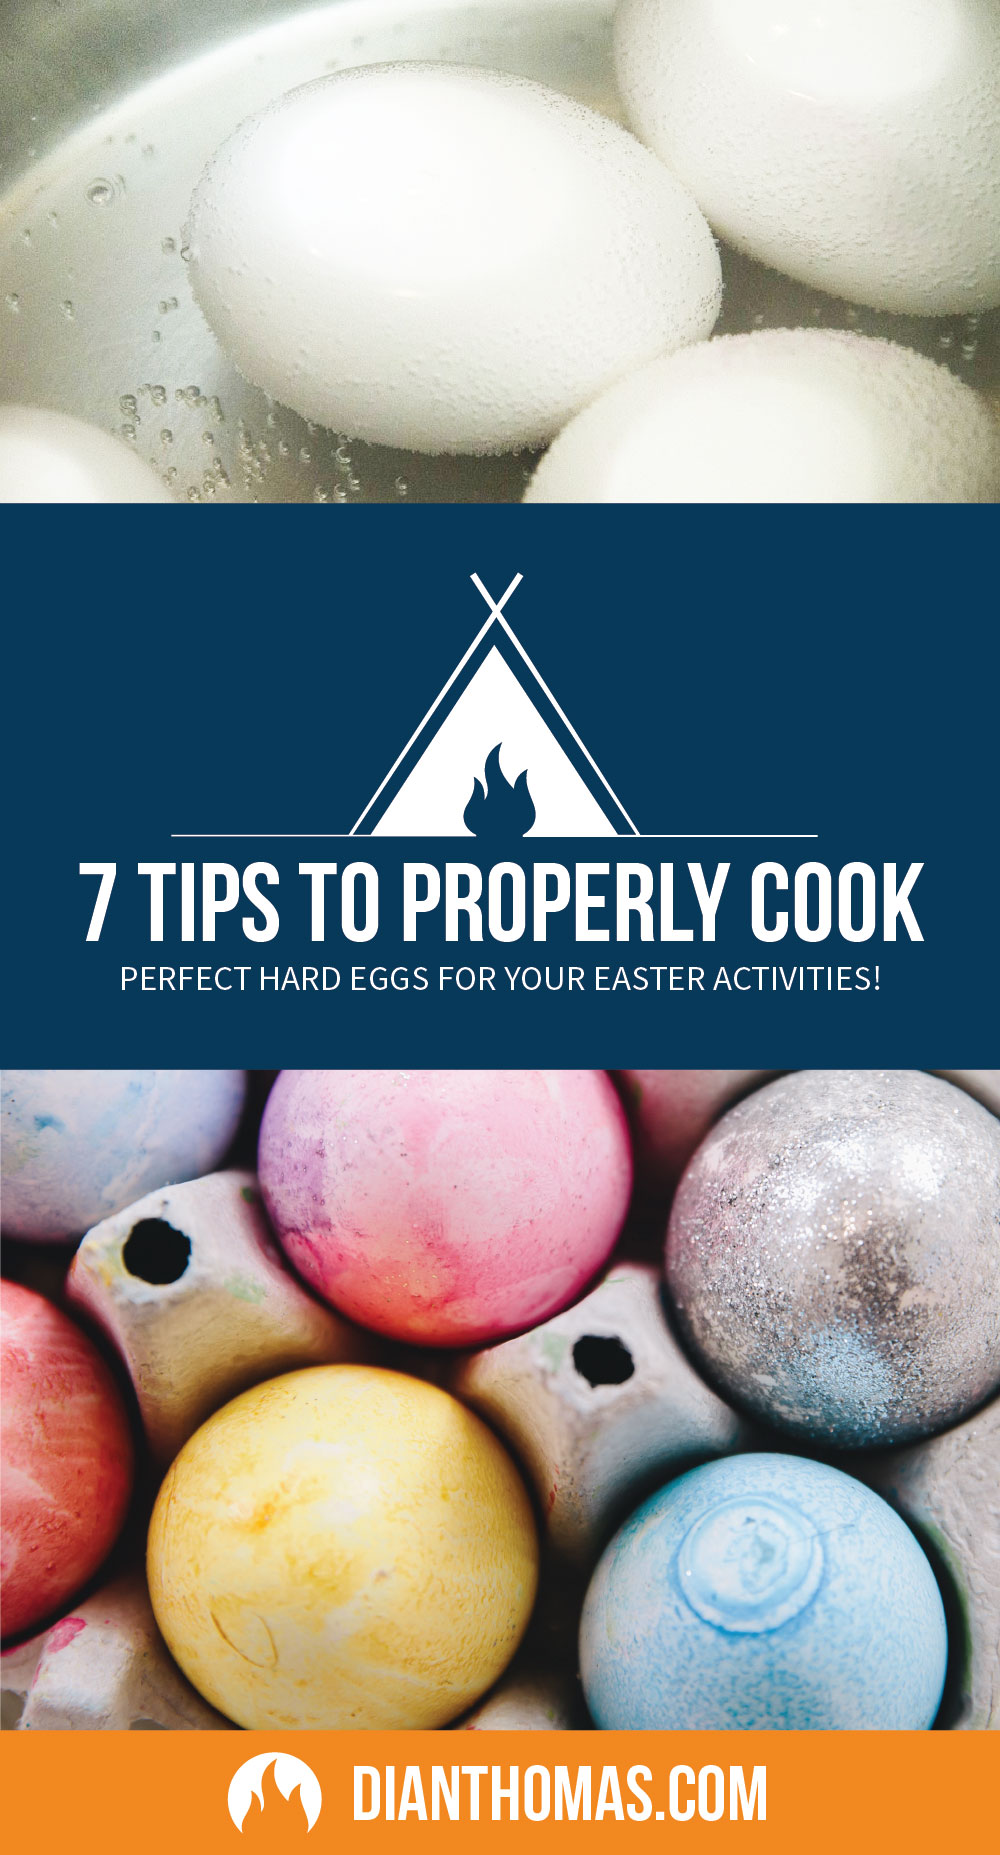 As Easter approaches learn 7 tips to successfully cook your hard boiled eggs so they are ready to be colored, decorated, hunted or eaten after your Easter egg hunt!